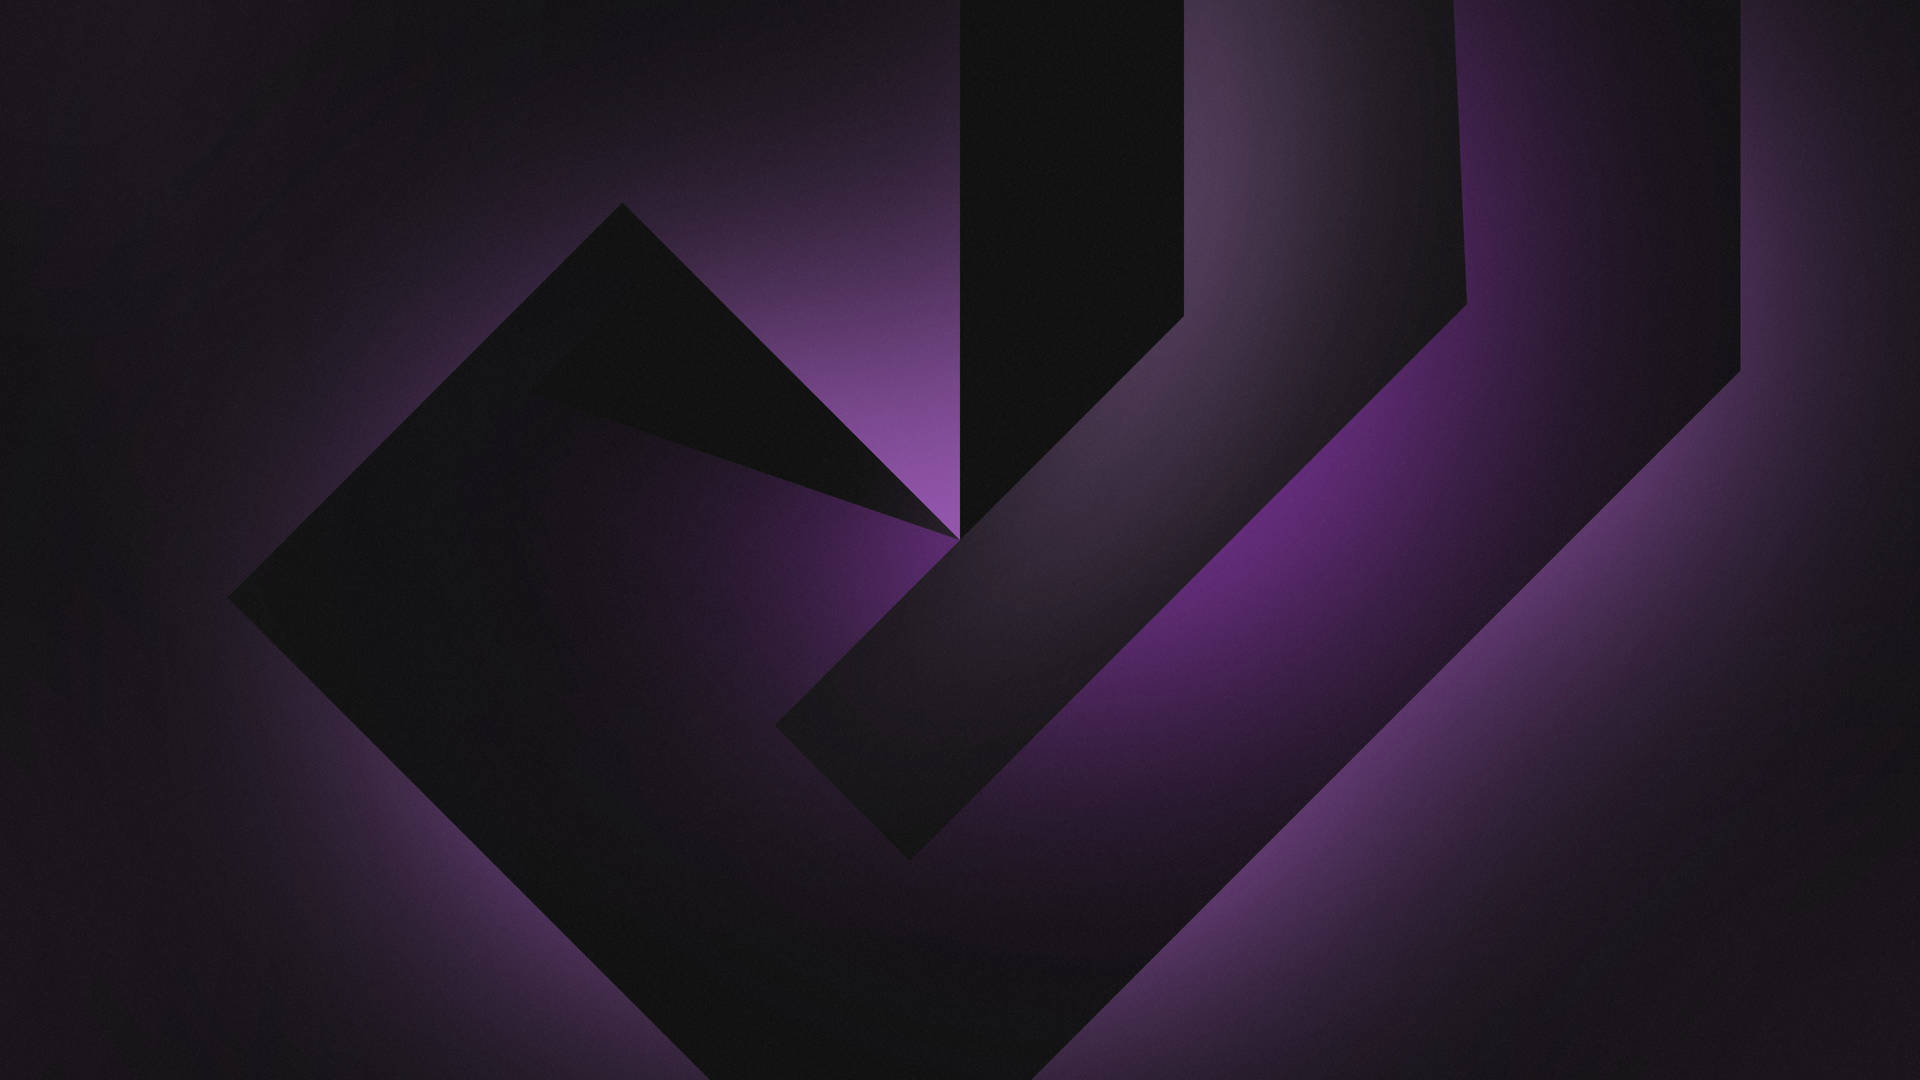 Abstract Geometric Violet Aesthetic Background Wallpaper